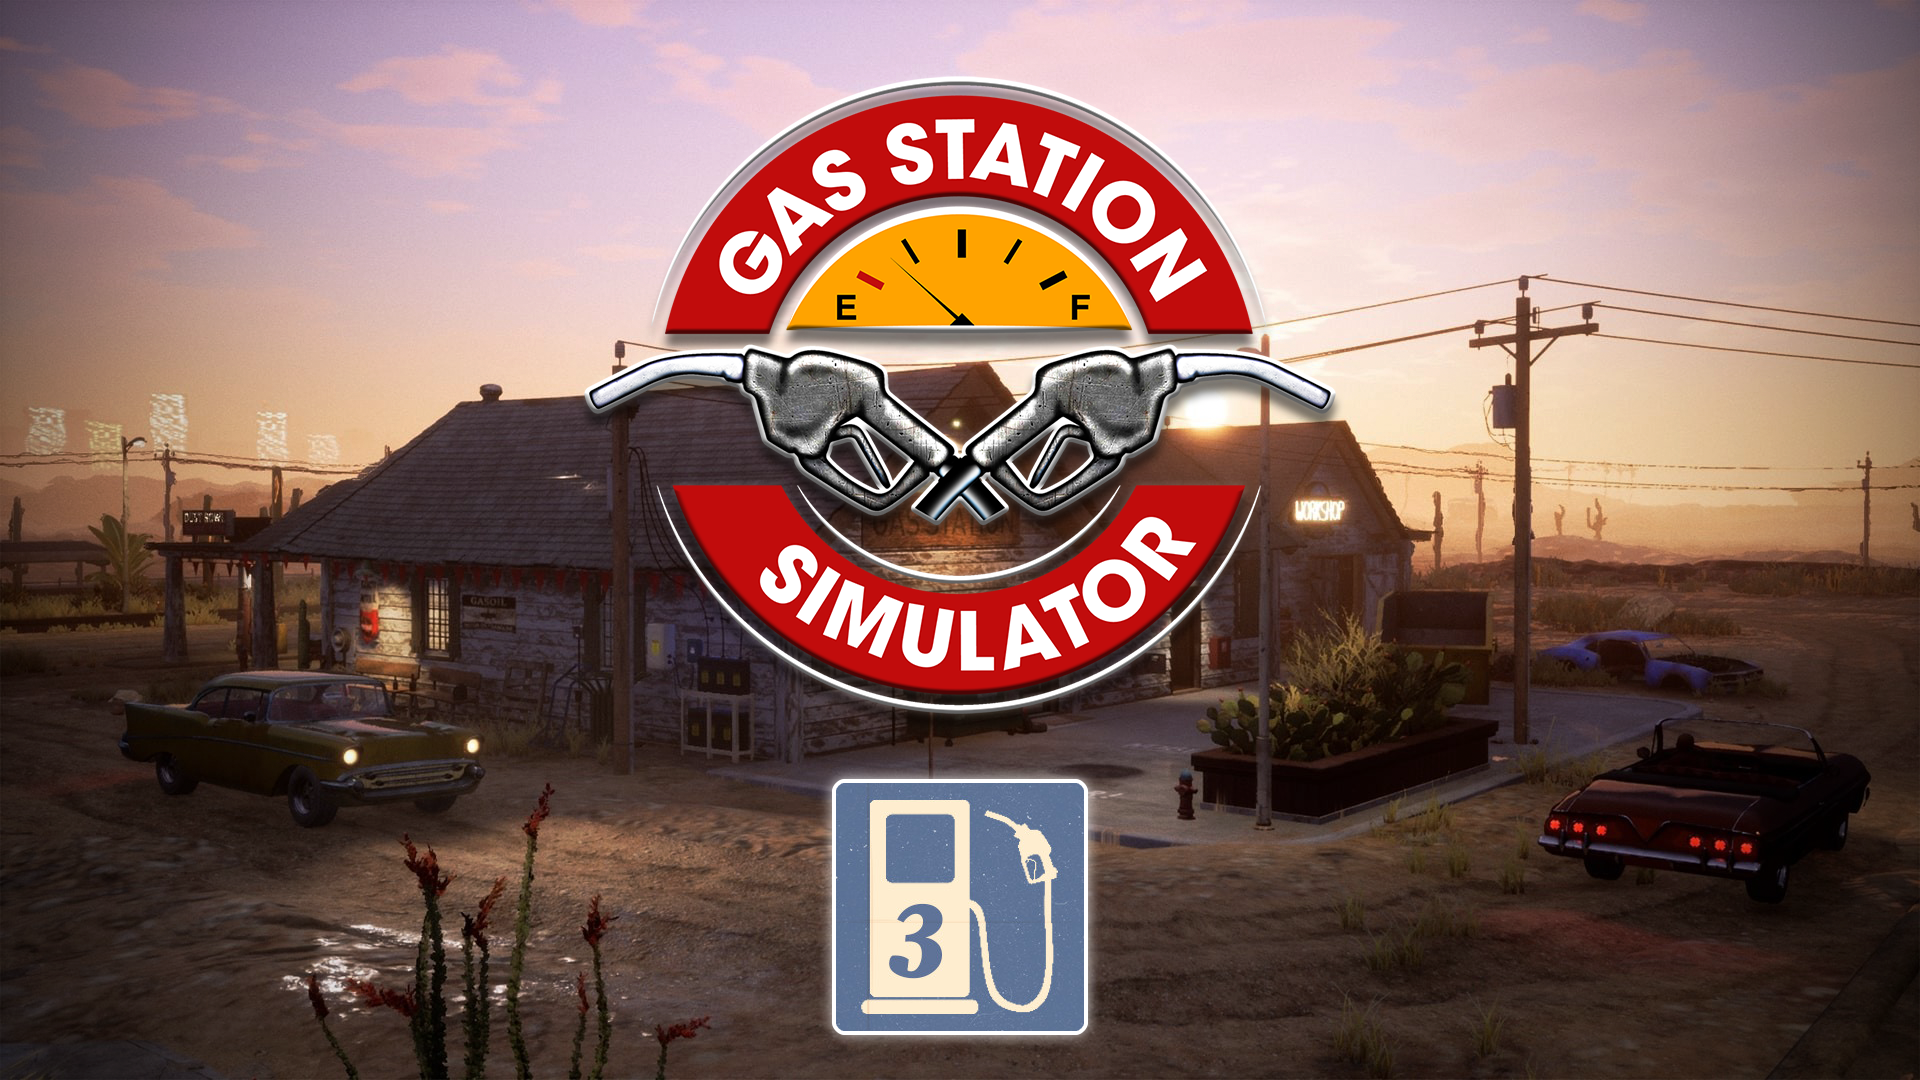 Icon for Station Lvl. 3